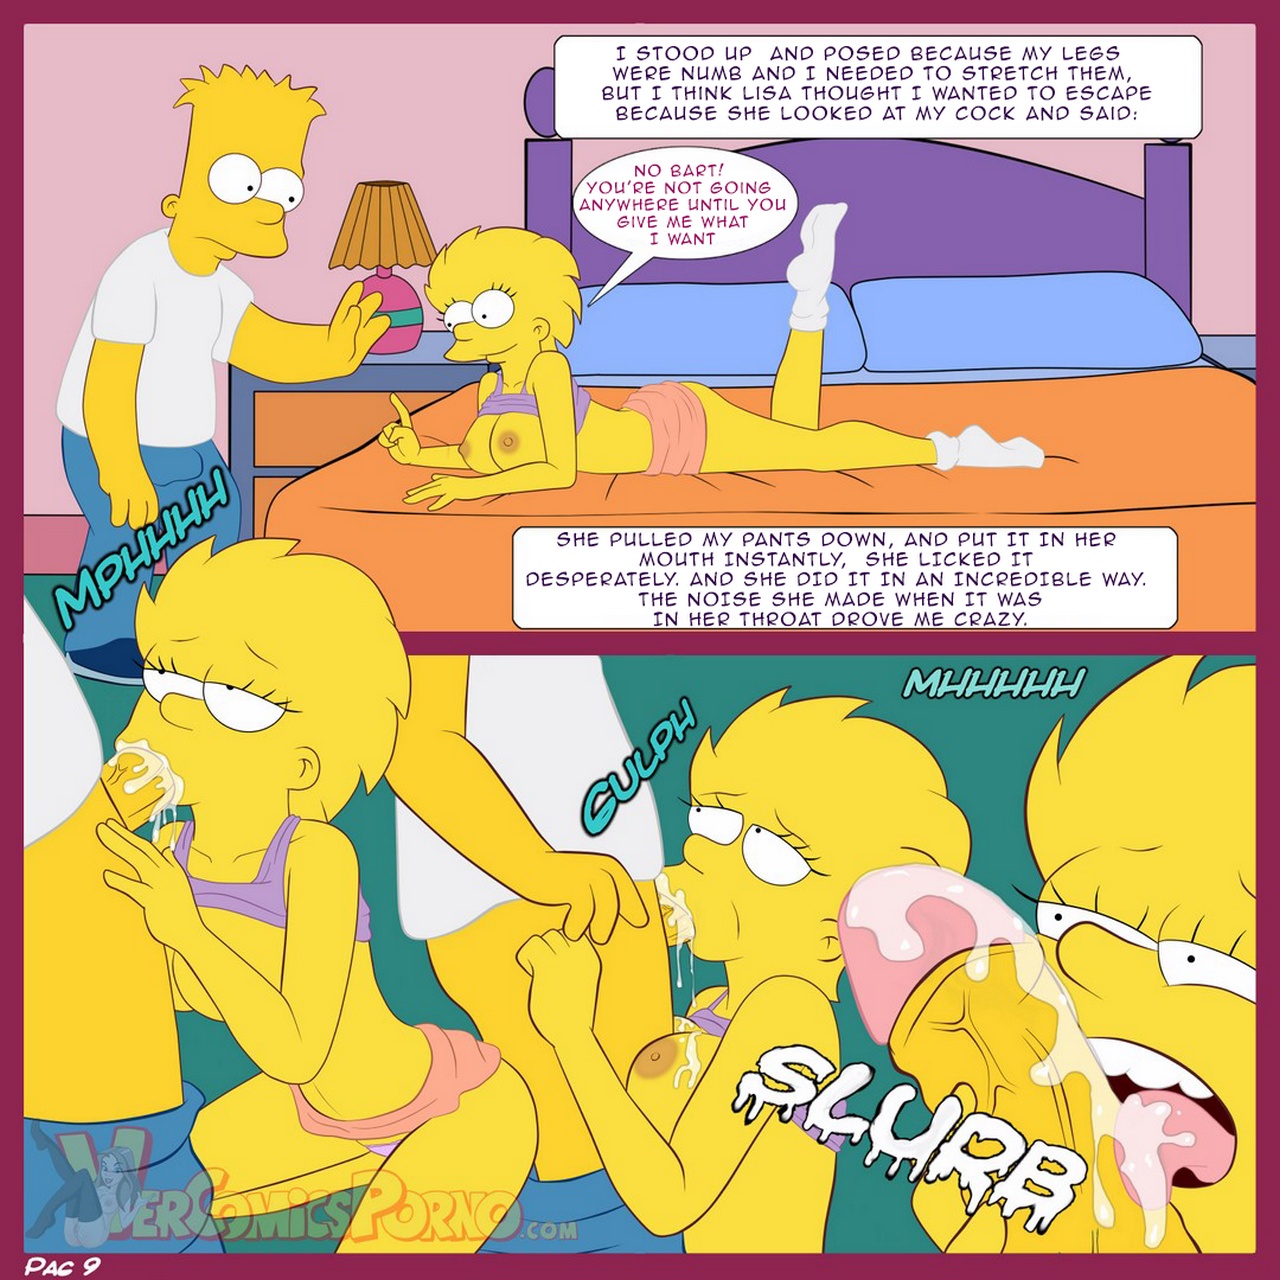 The Simpsons 1 - A Visit From The Sisterch